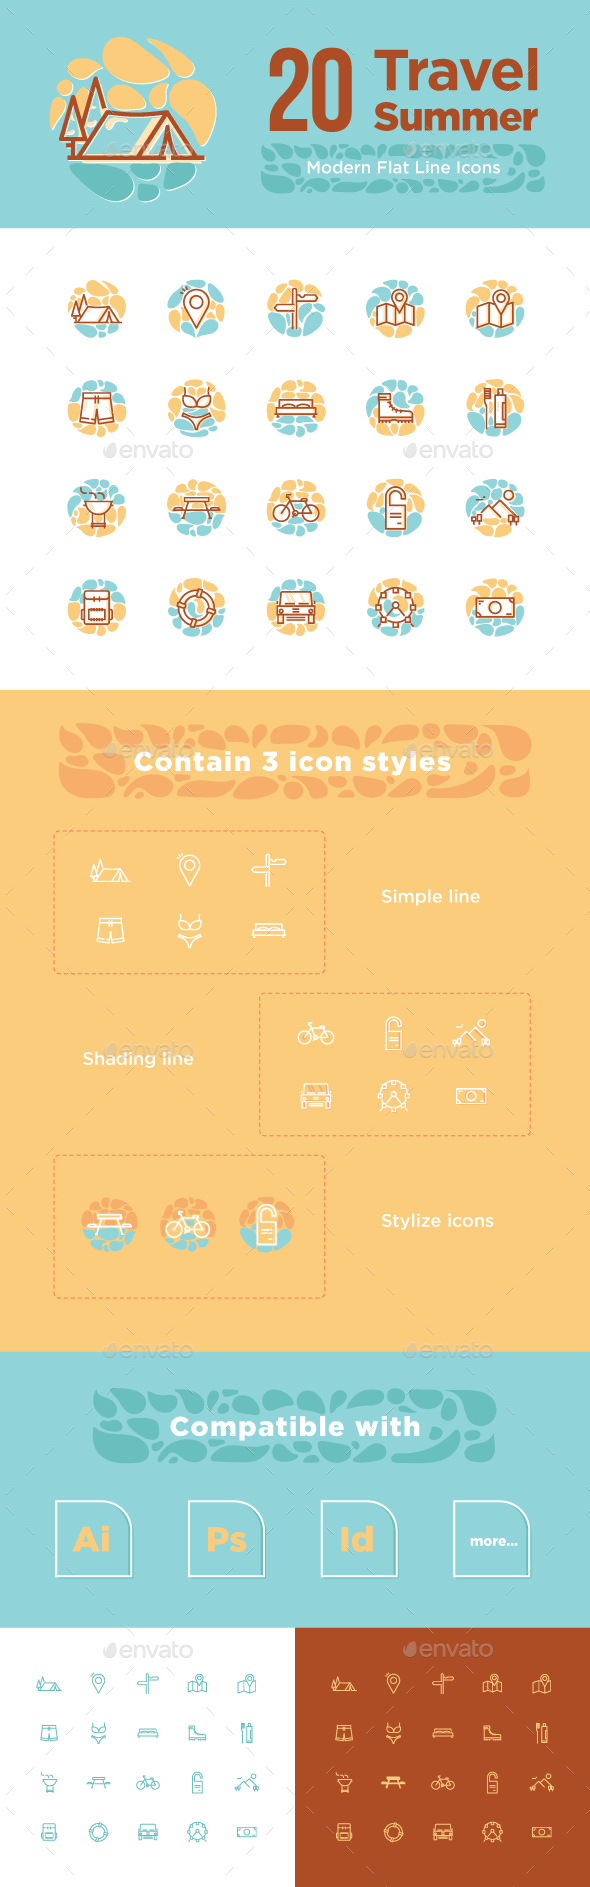 20 Travel Summer icon sets in Business Icons - product preview 1